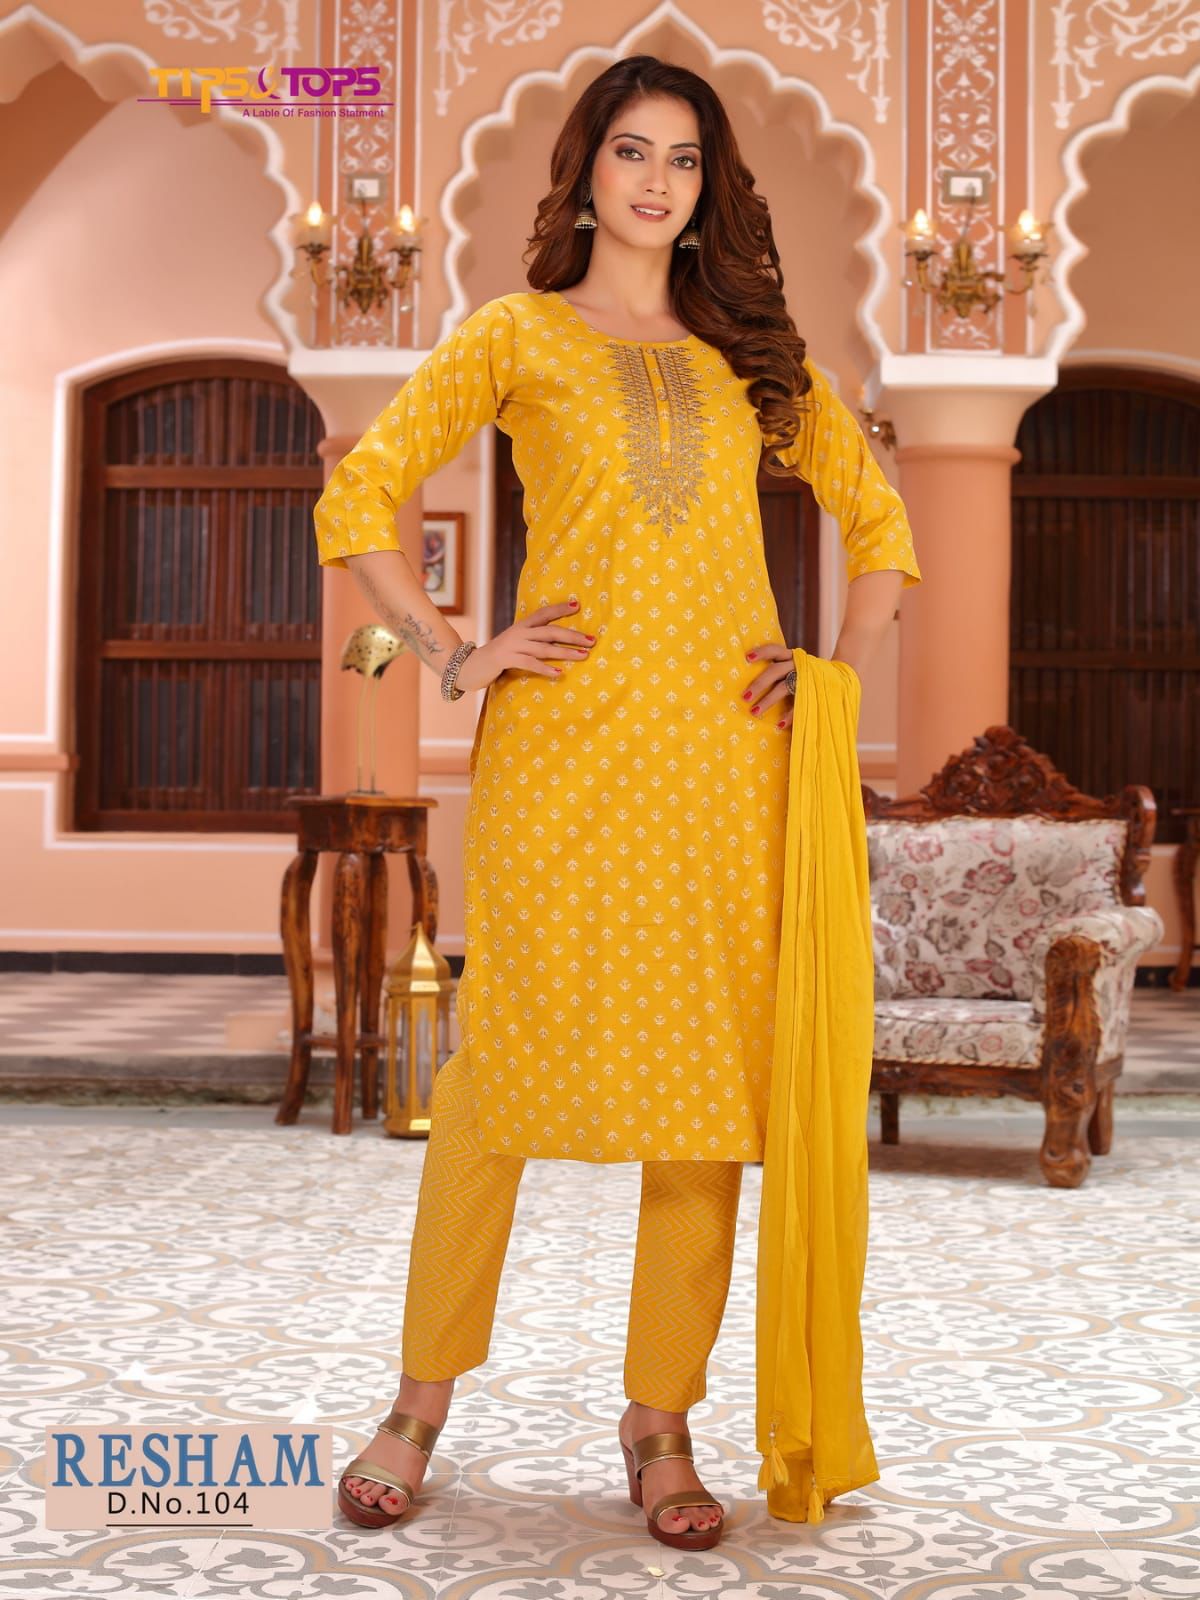 Tips And Tops Resham collection 4